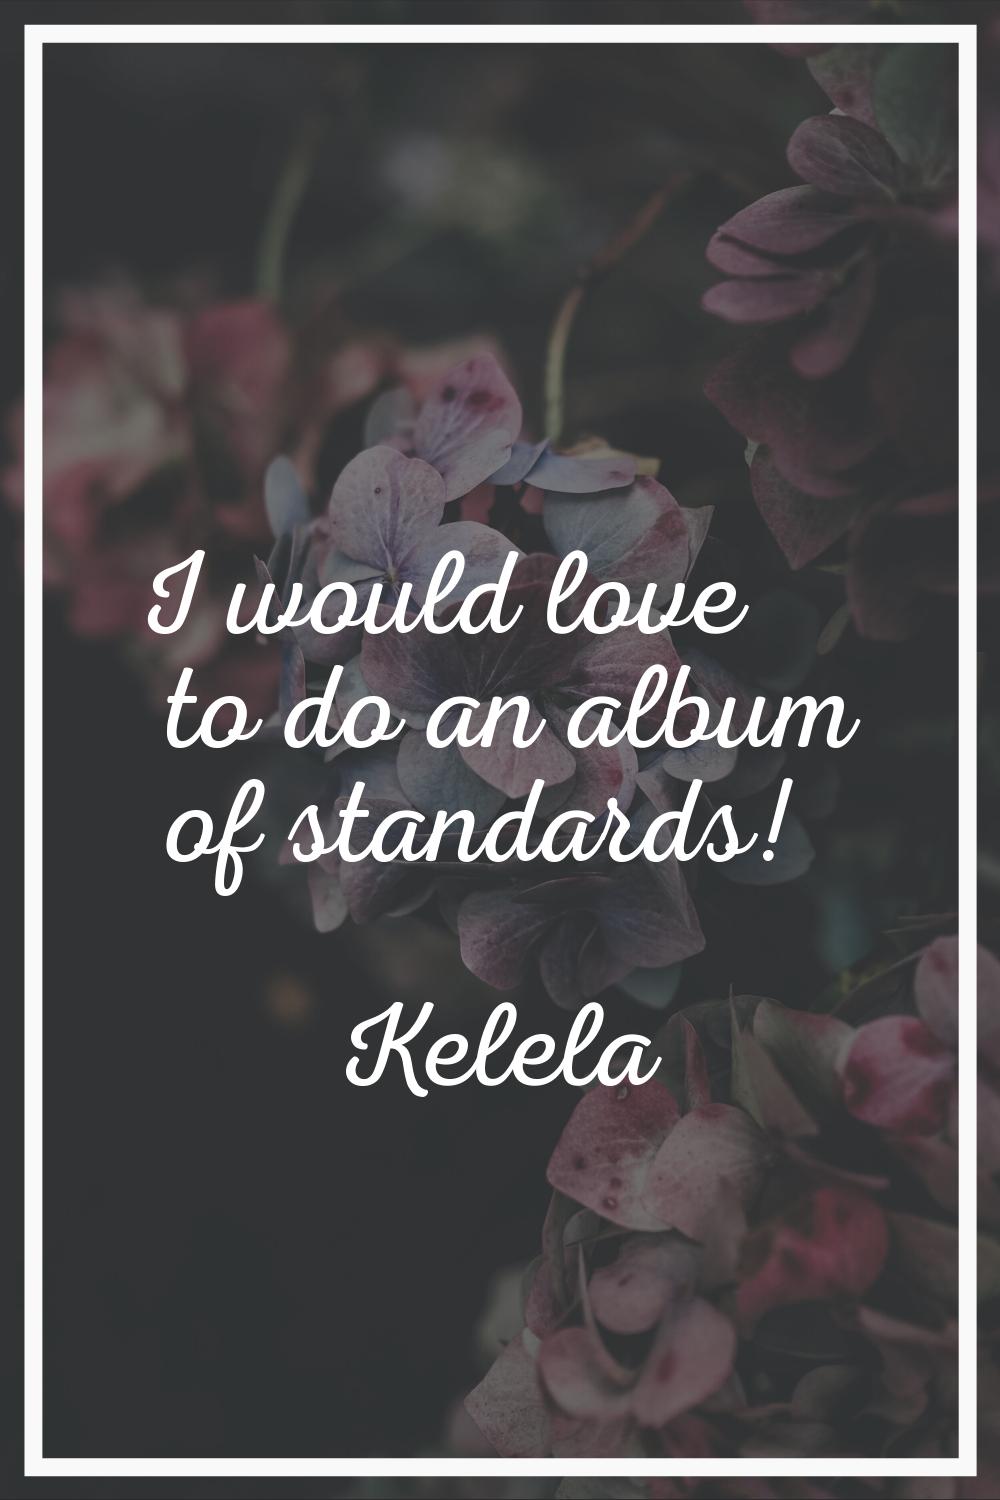 I would love to do an album of standards!